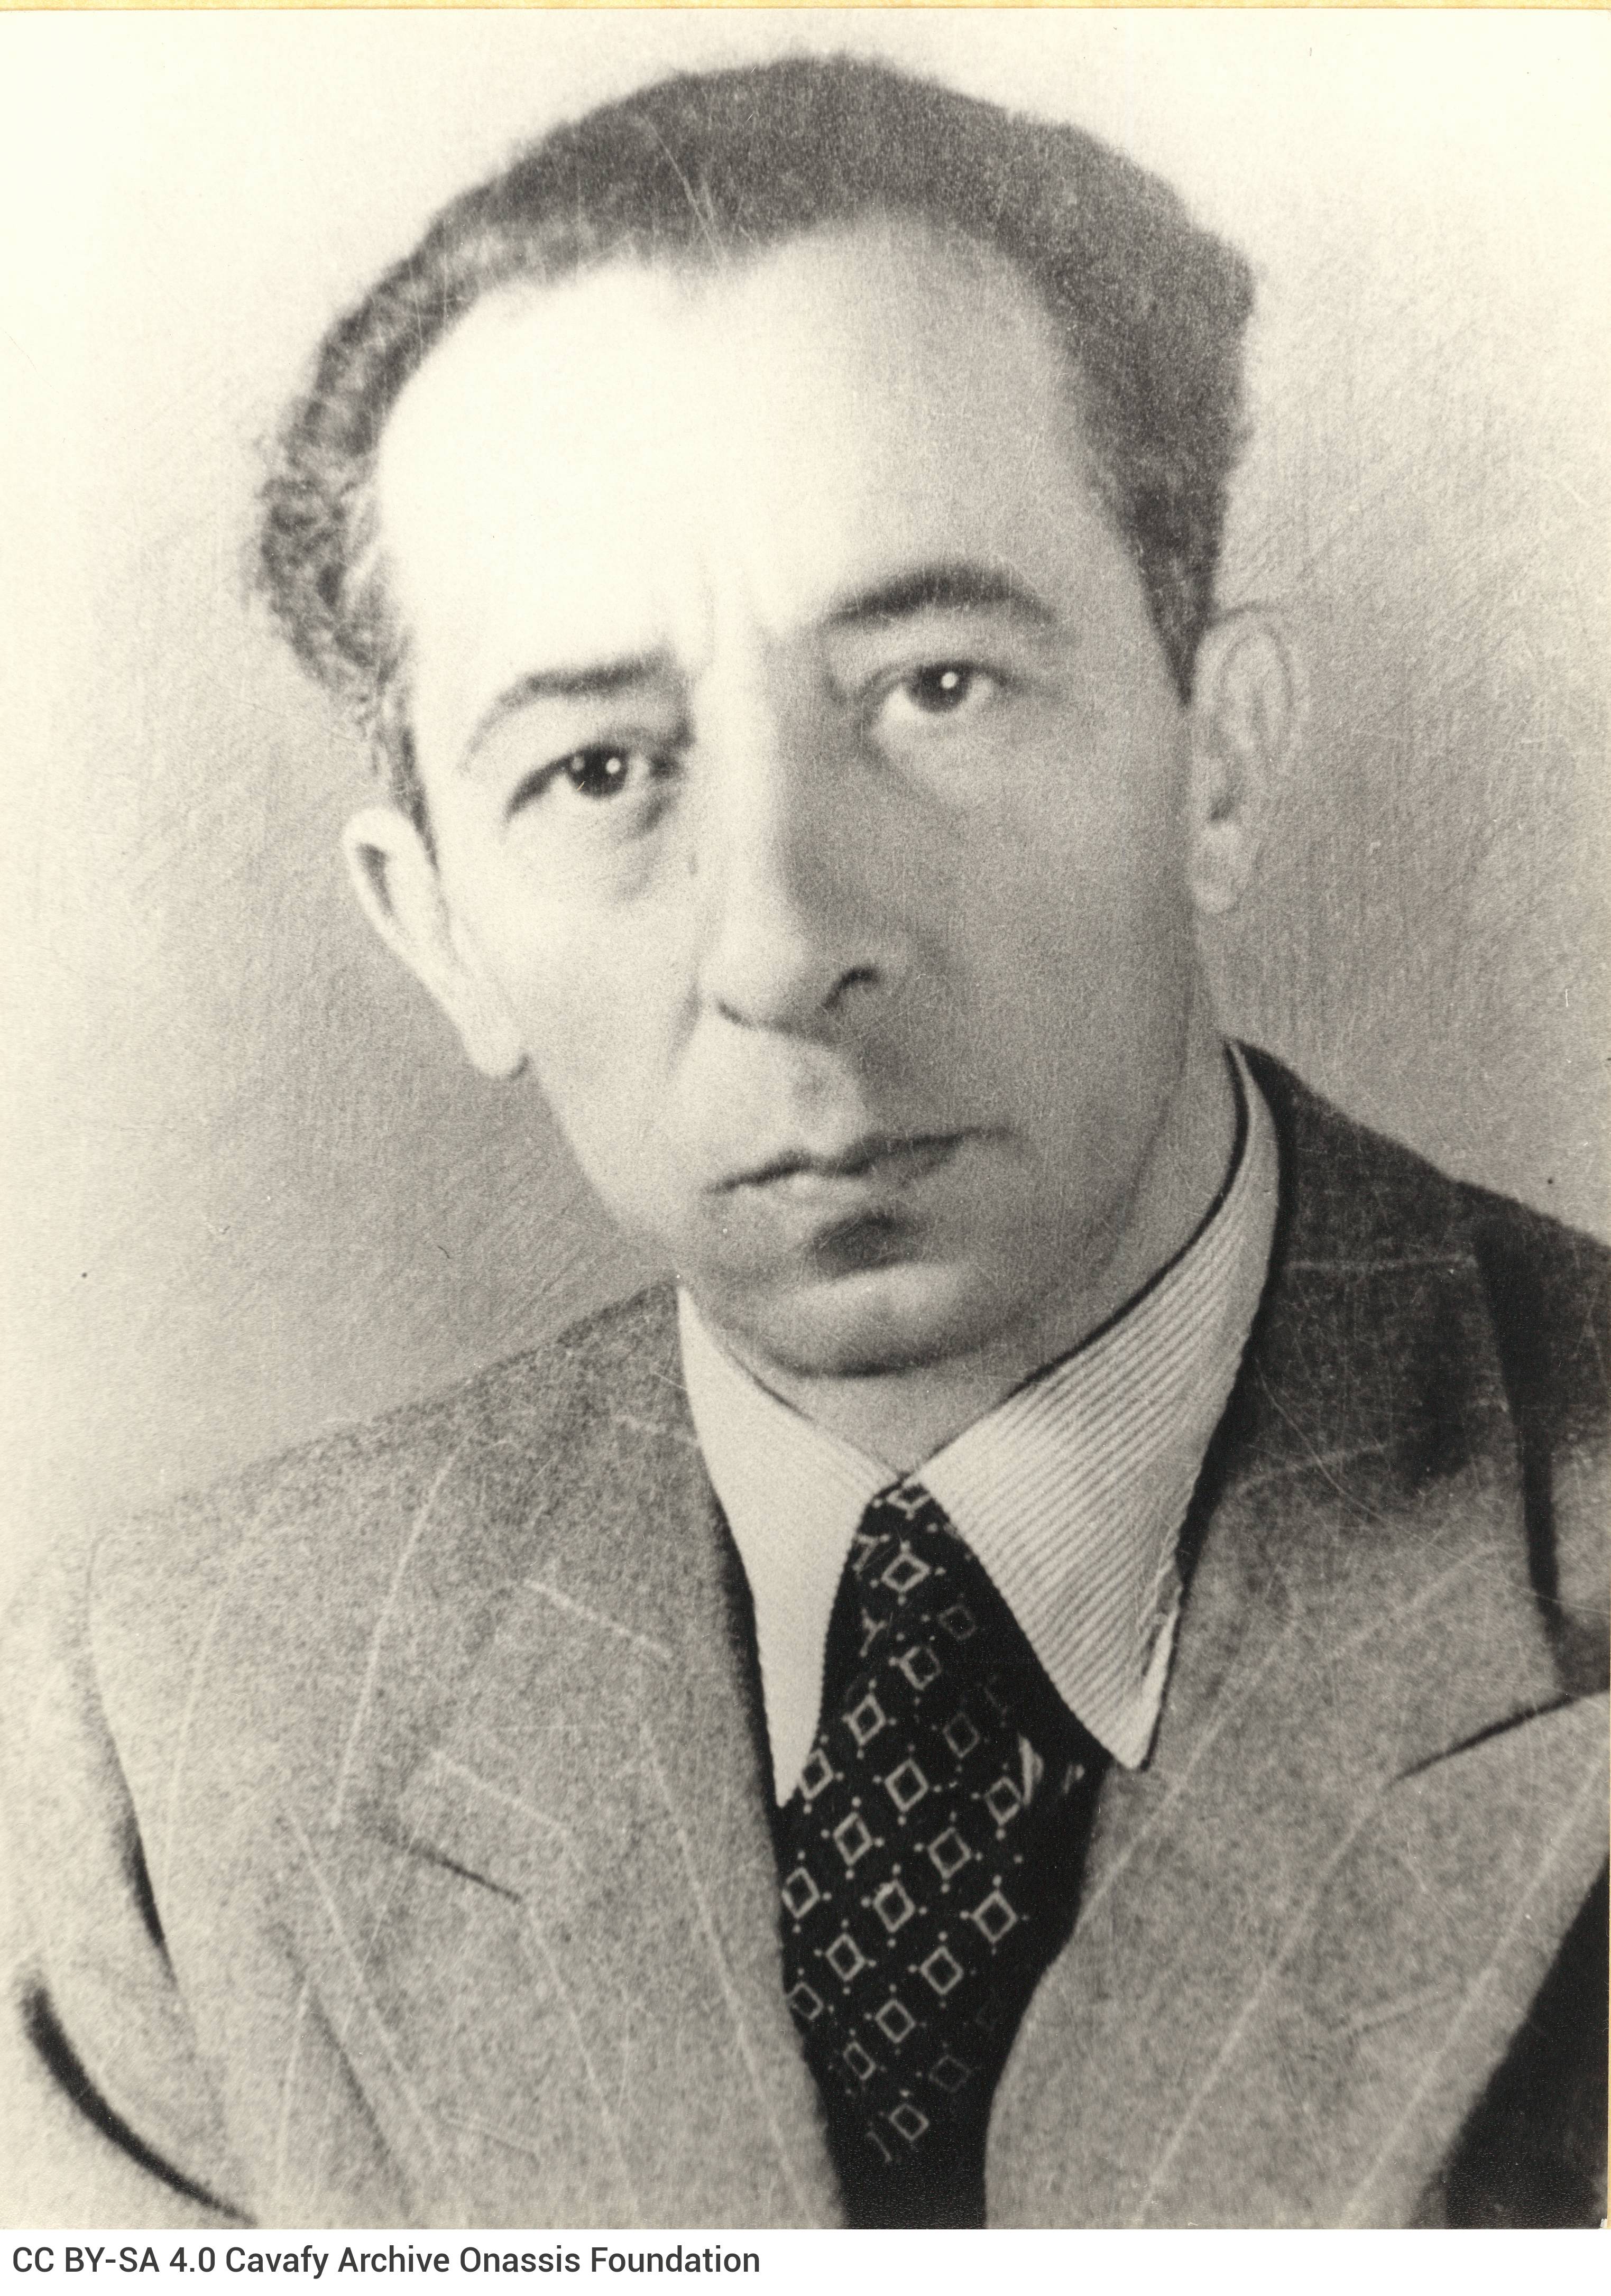 Photograph of Alekos Singopoulo at middle age.